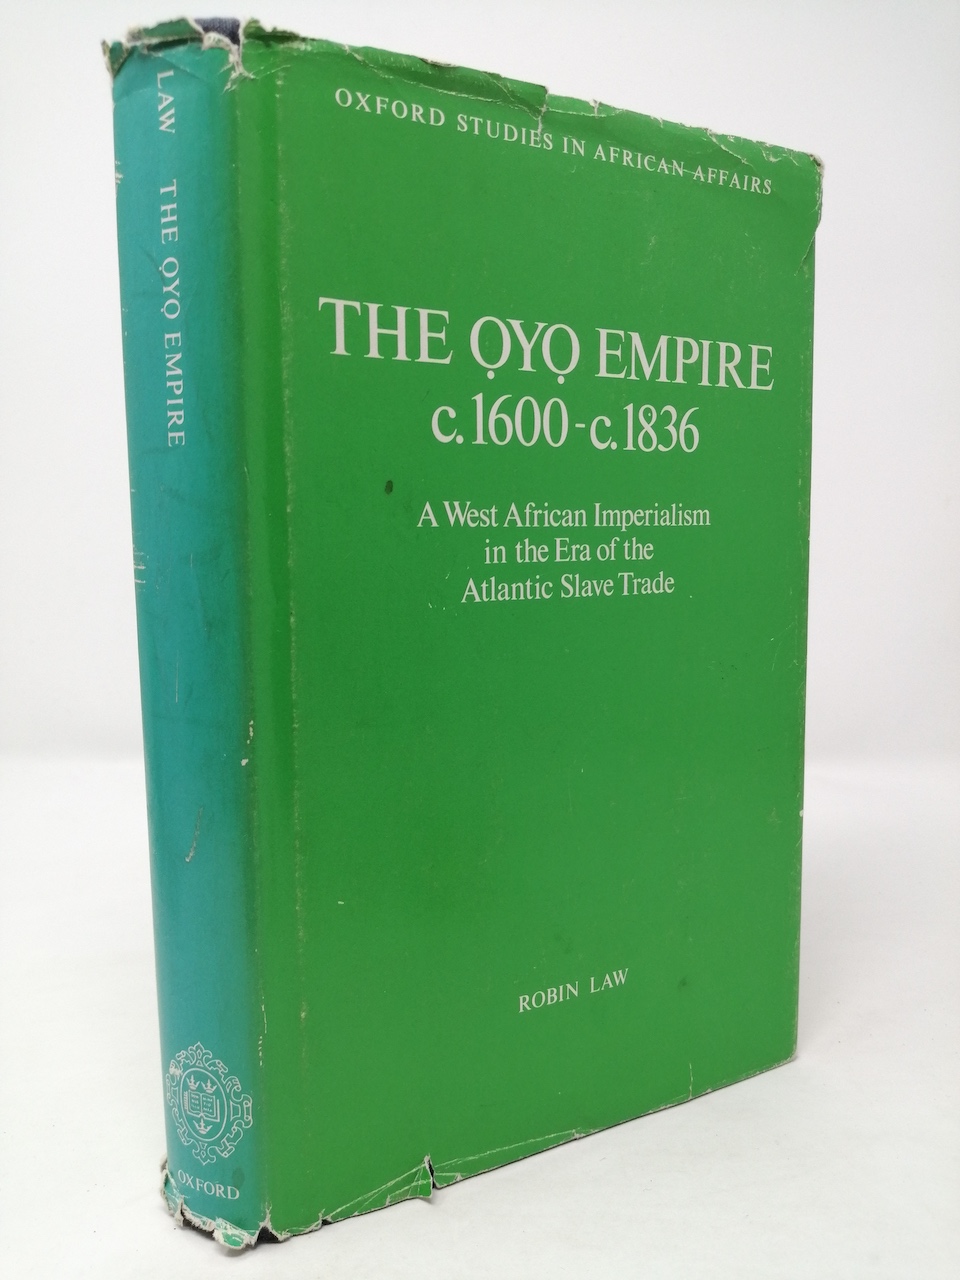 The Oyo Empire, c.1600 - c.1836: A West African Imperialism in the Era of the Atlantic Slave Trade. - Robin Law.